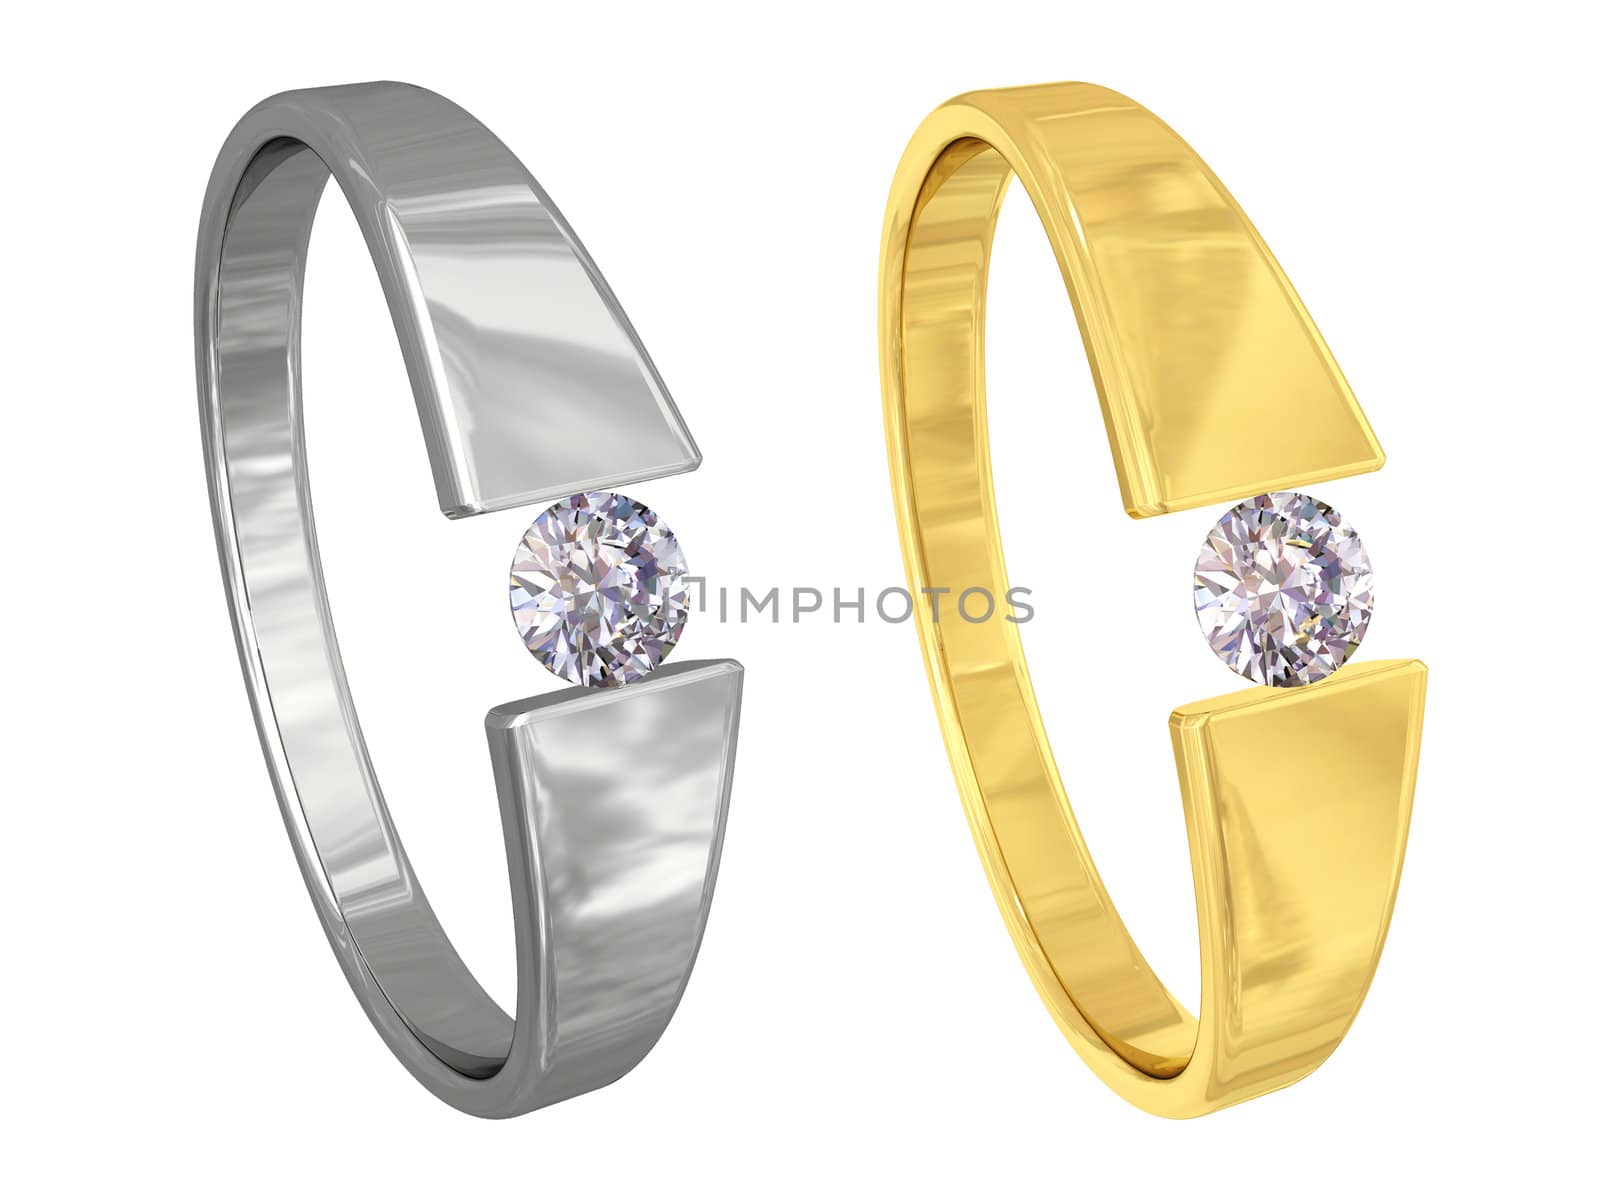 Gold and silver rings with diamonds isolated on white background. High resolution 3D image.